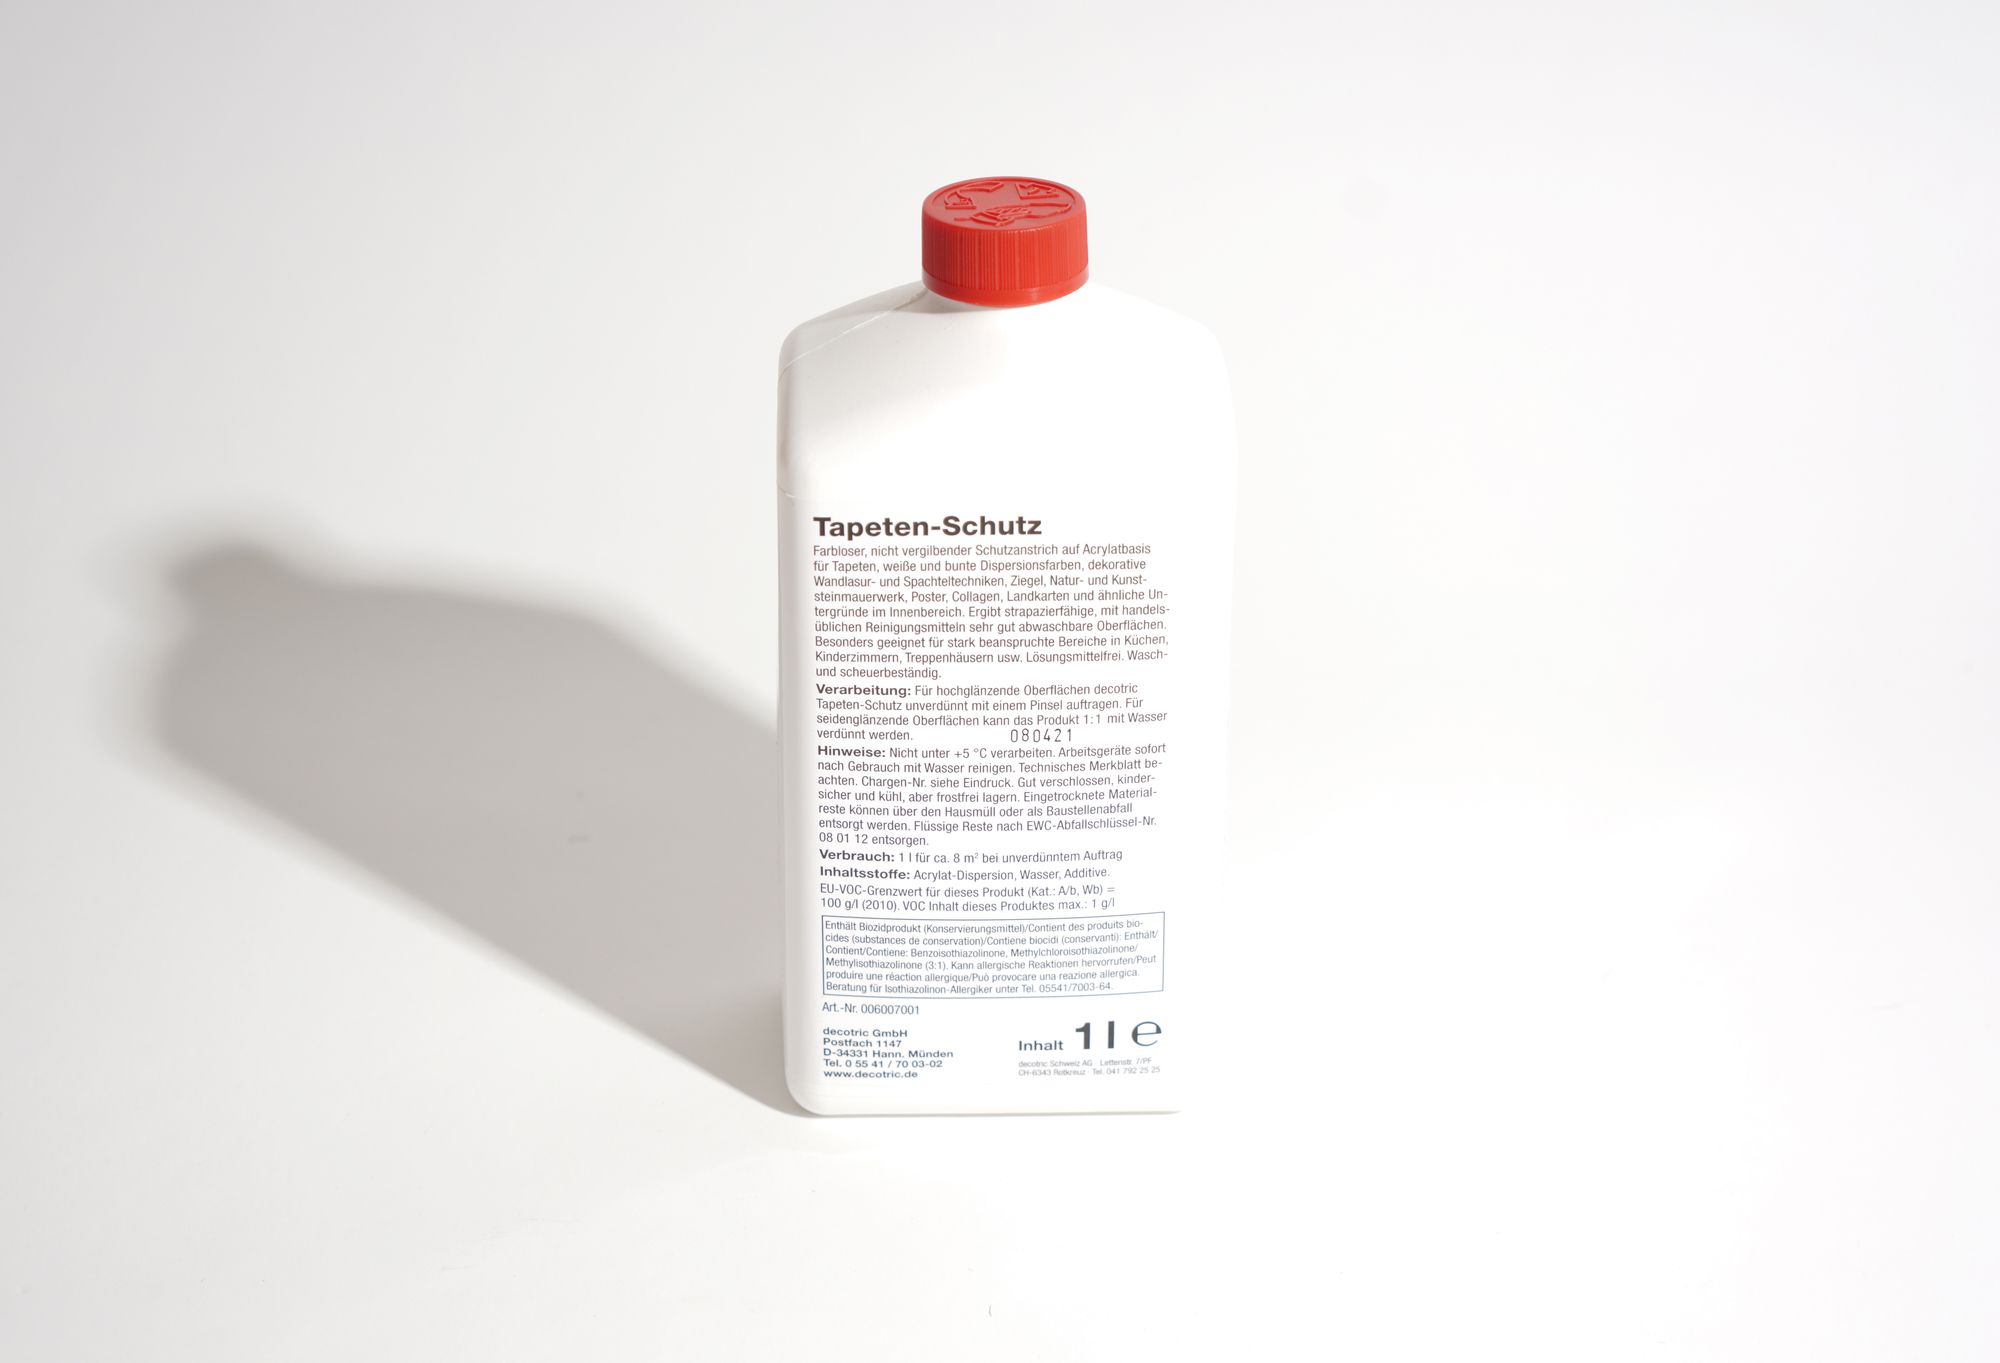 Product image protective coating for wallpaper to seal against water and dirt AS909019